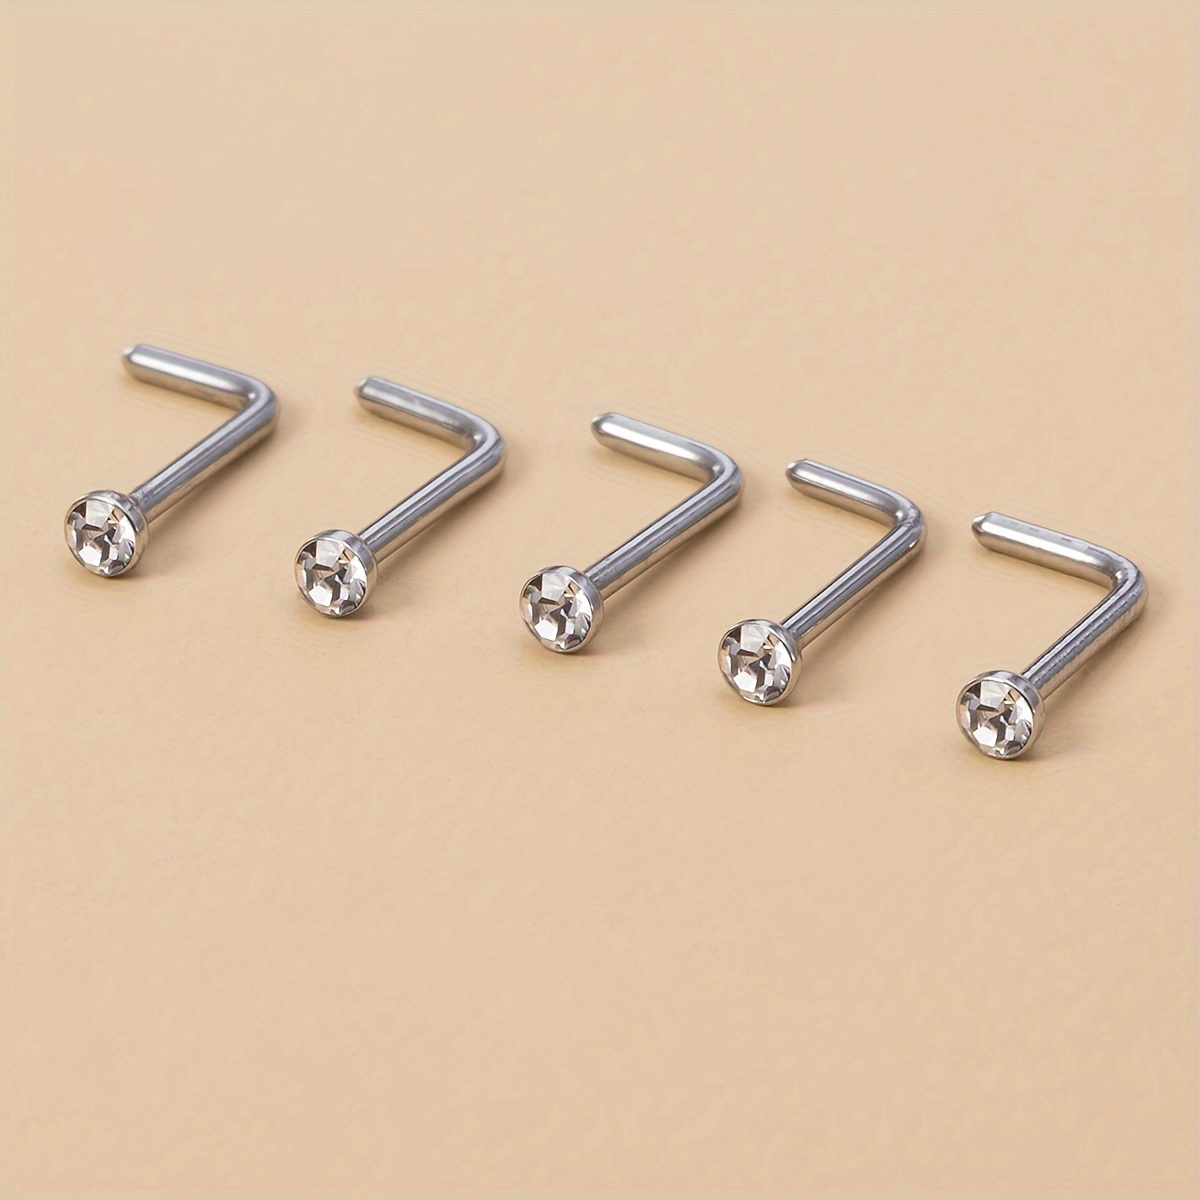 

5pcs L-shape Cz Crystal Nose Ring Stud Stainless Steel Nose Piercing Jewelry For Women Men 20 Gauge